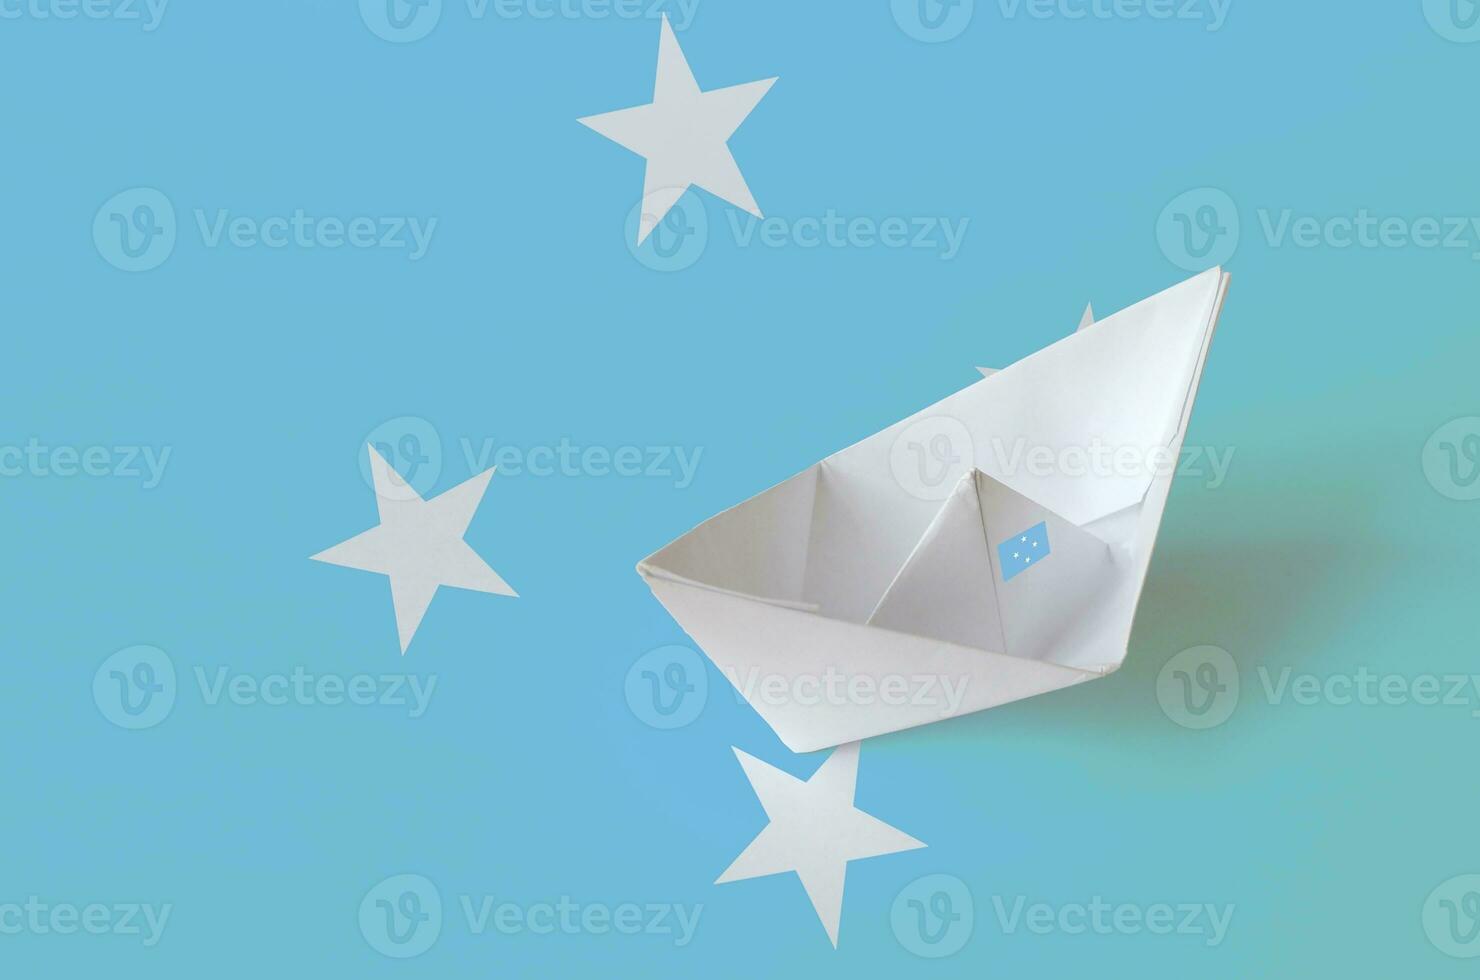 Micronesia flag depicted on paper origami ship closeup. Handmade arts concept photo